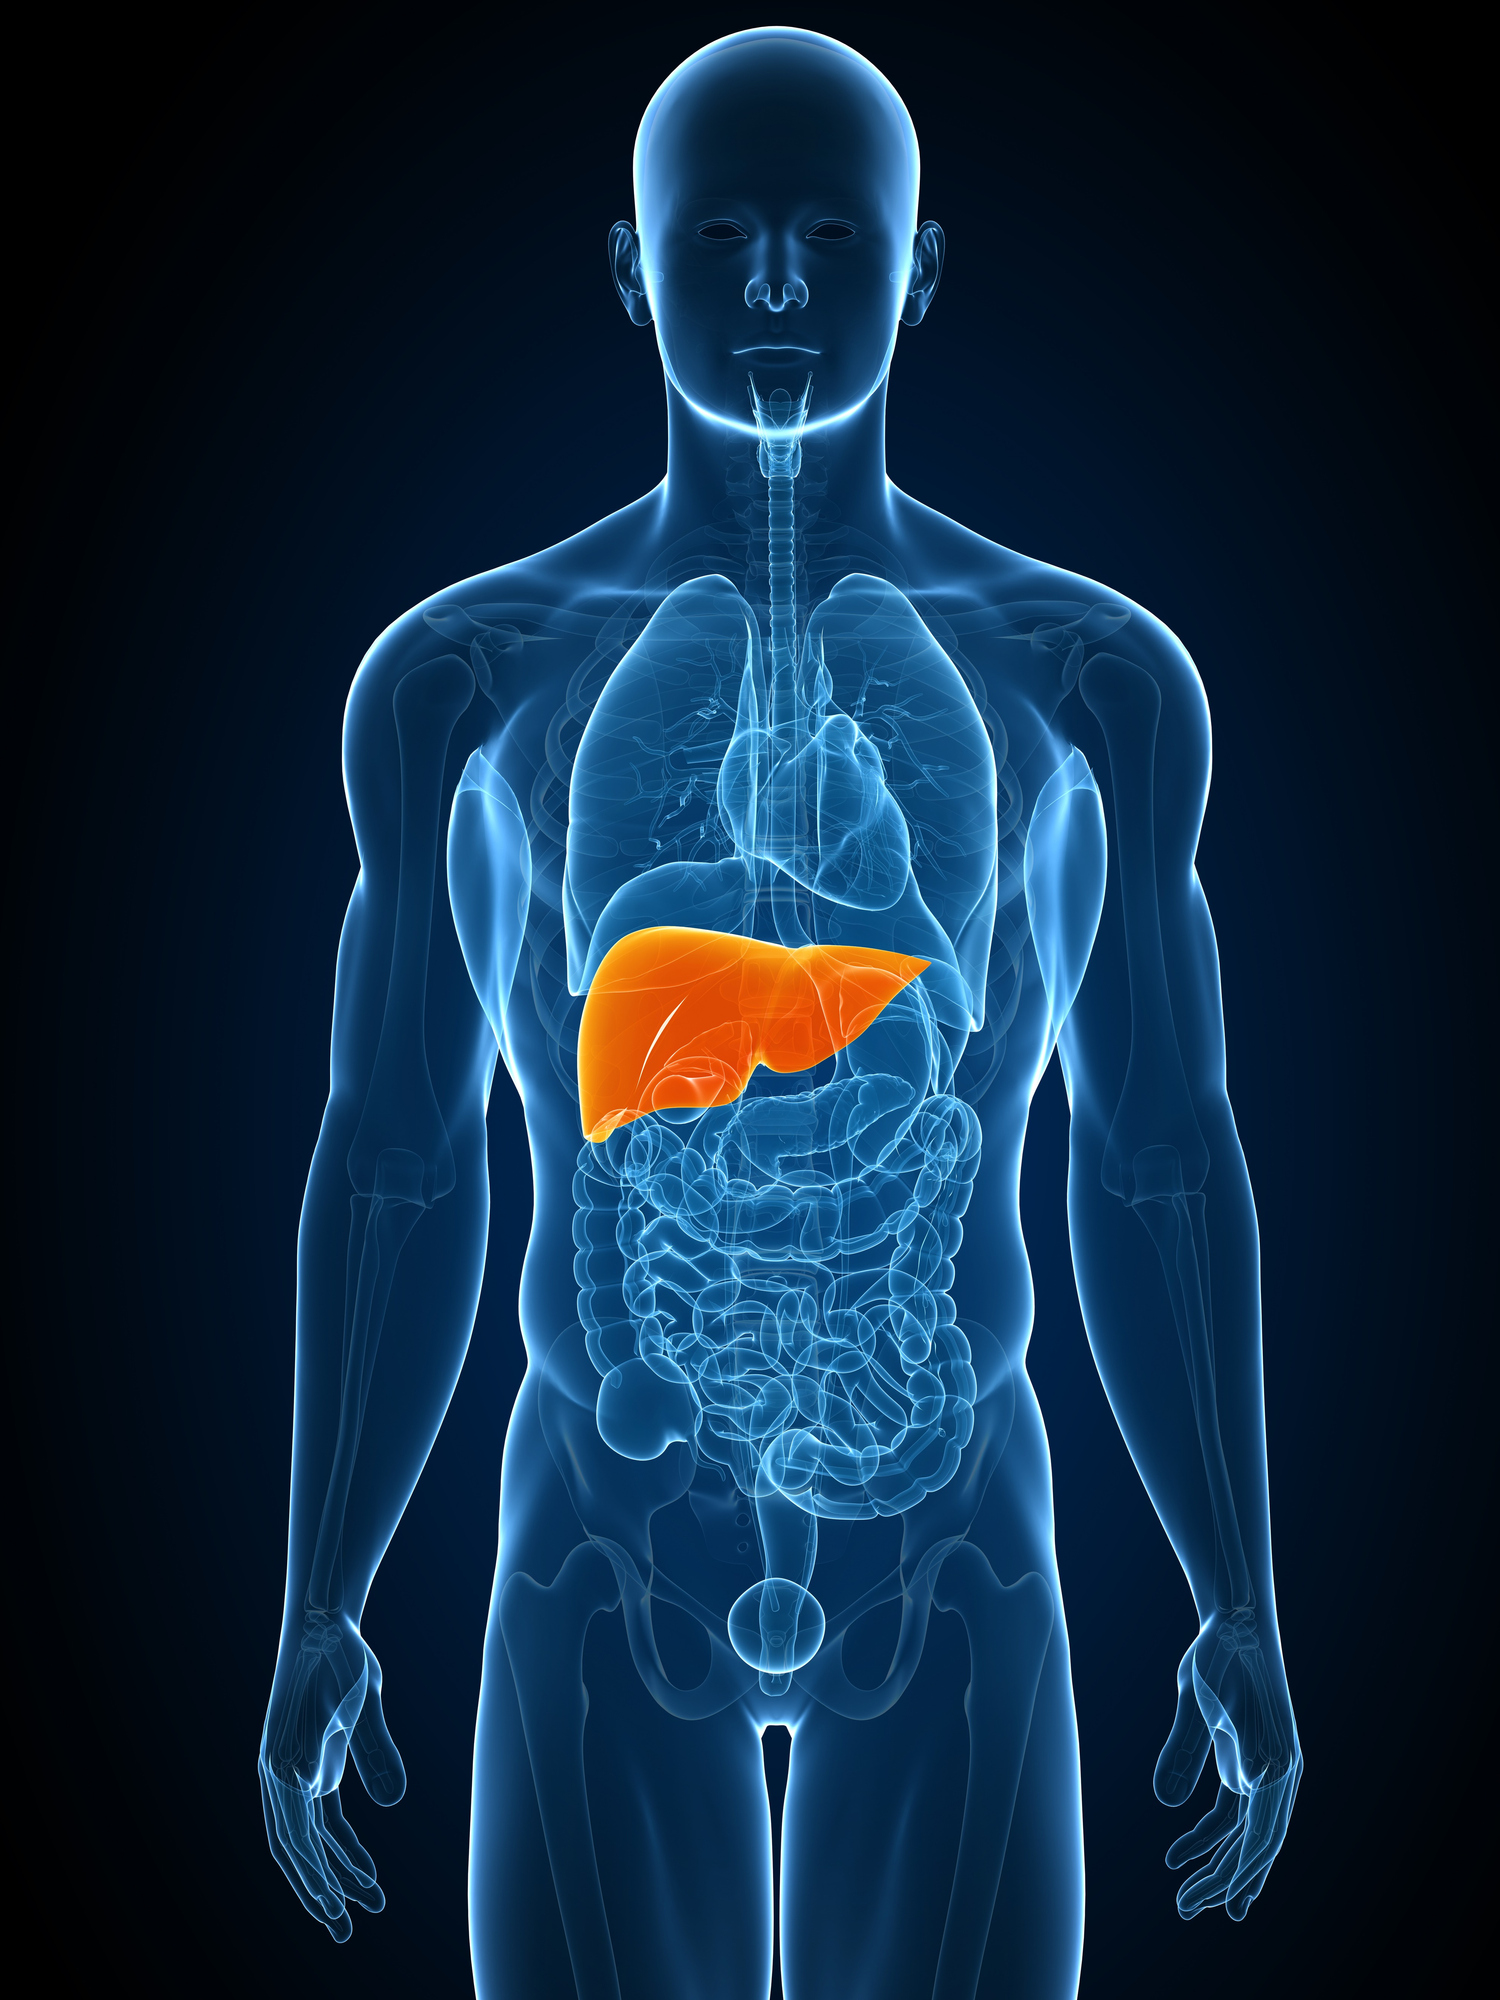 Graphic of a human body with the liver visible.